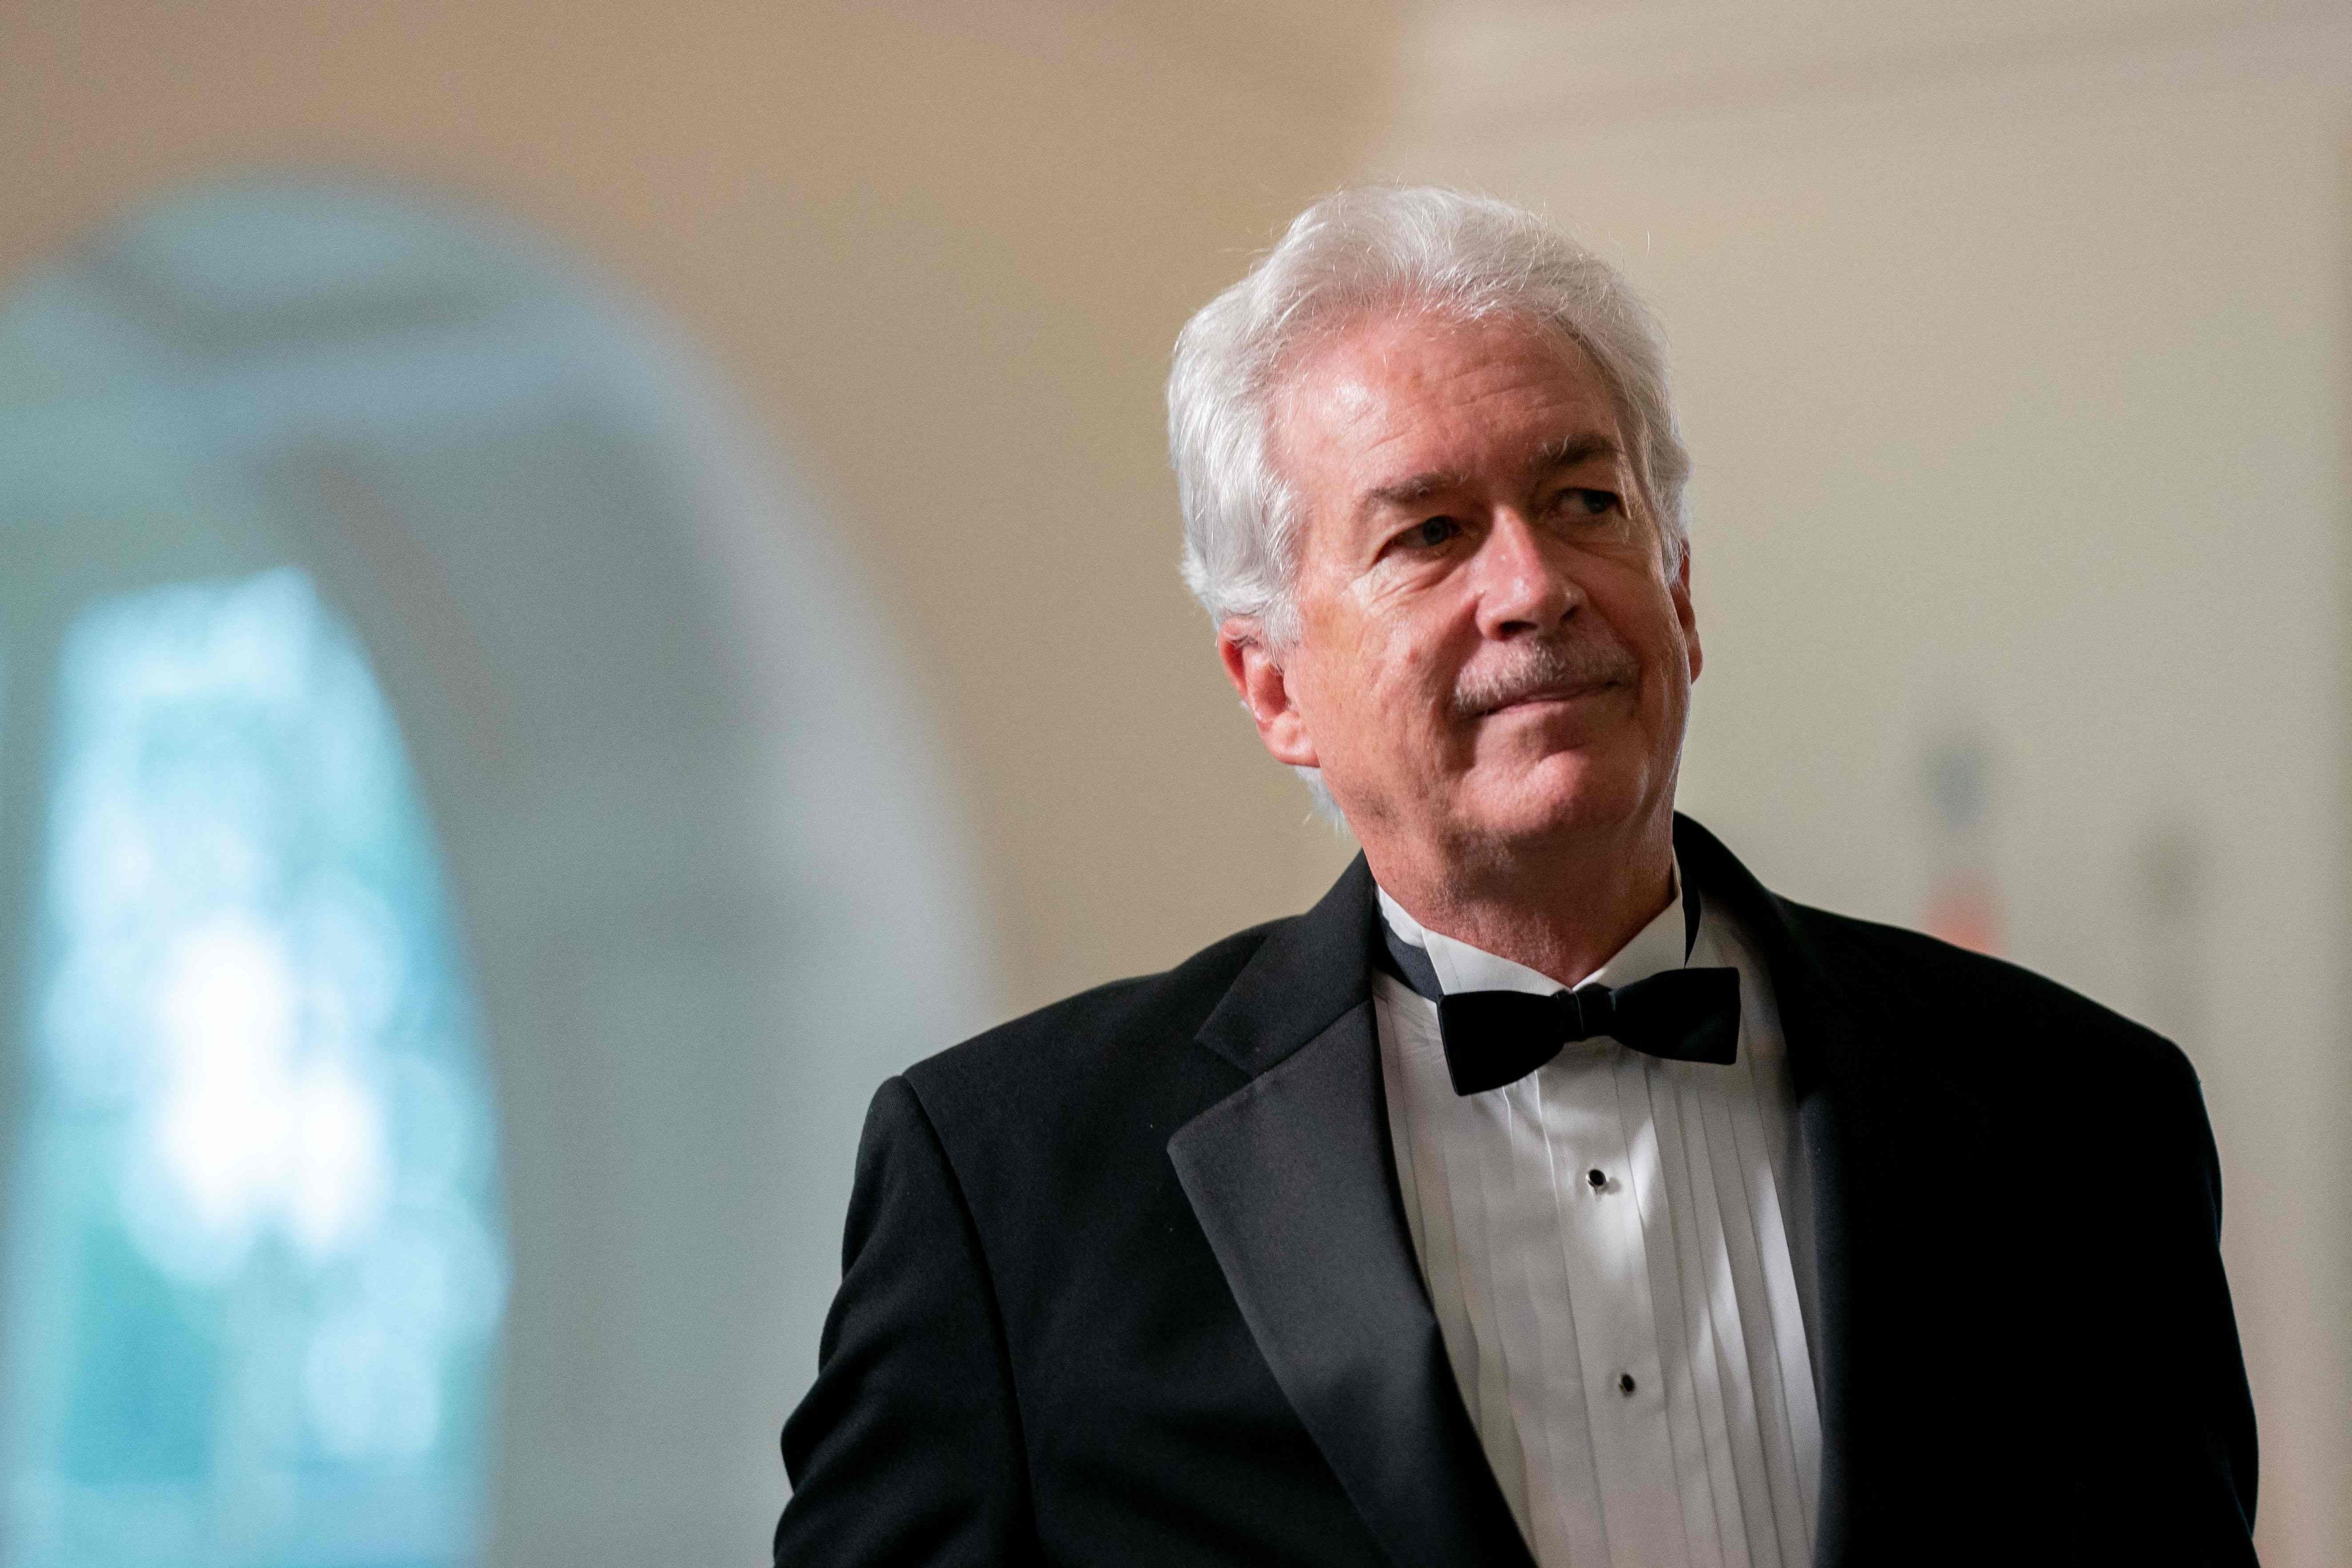 CIA drector William Burns at the White House in Washington on June 22. Photo: AFP